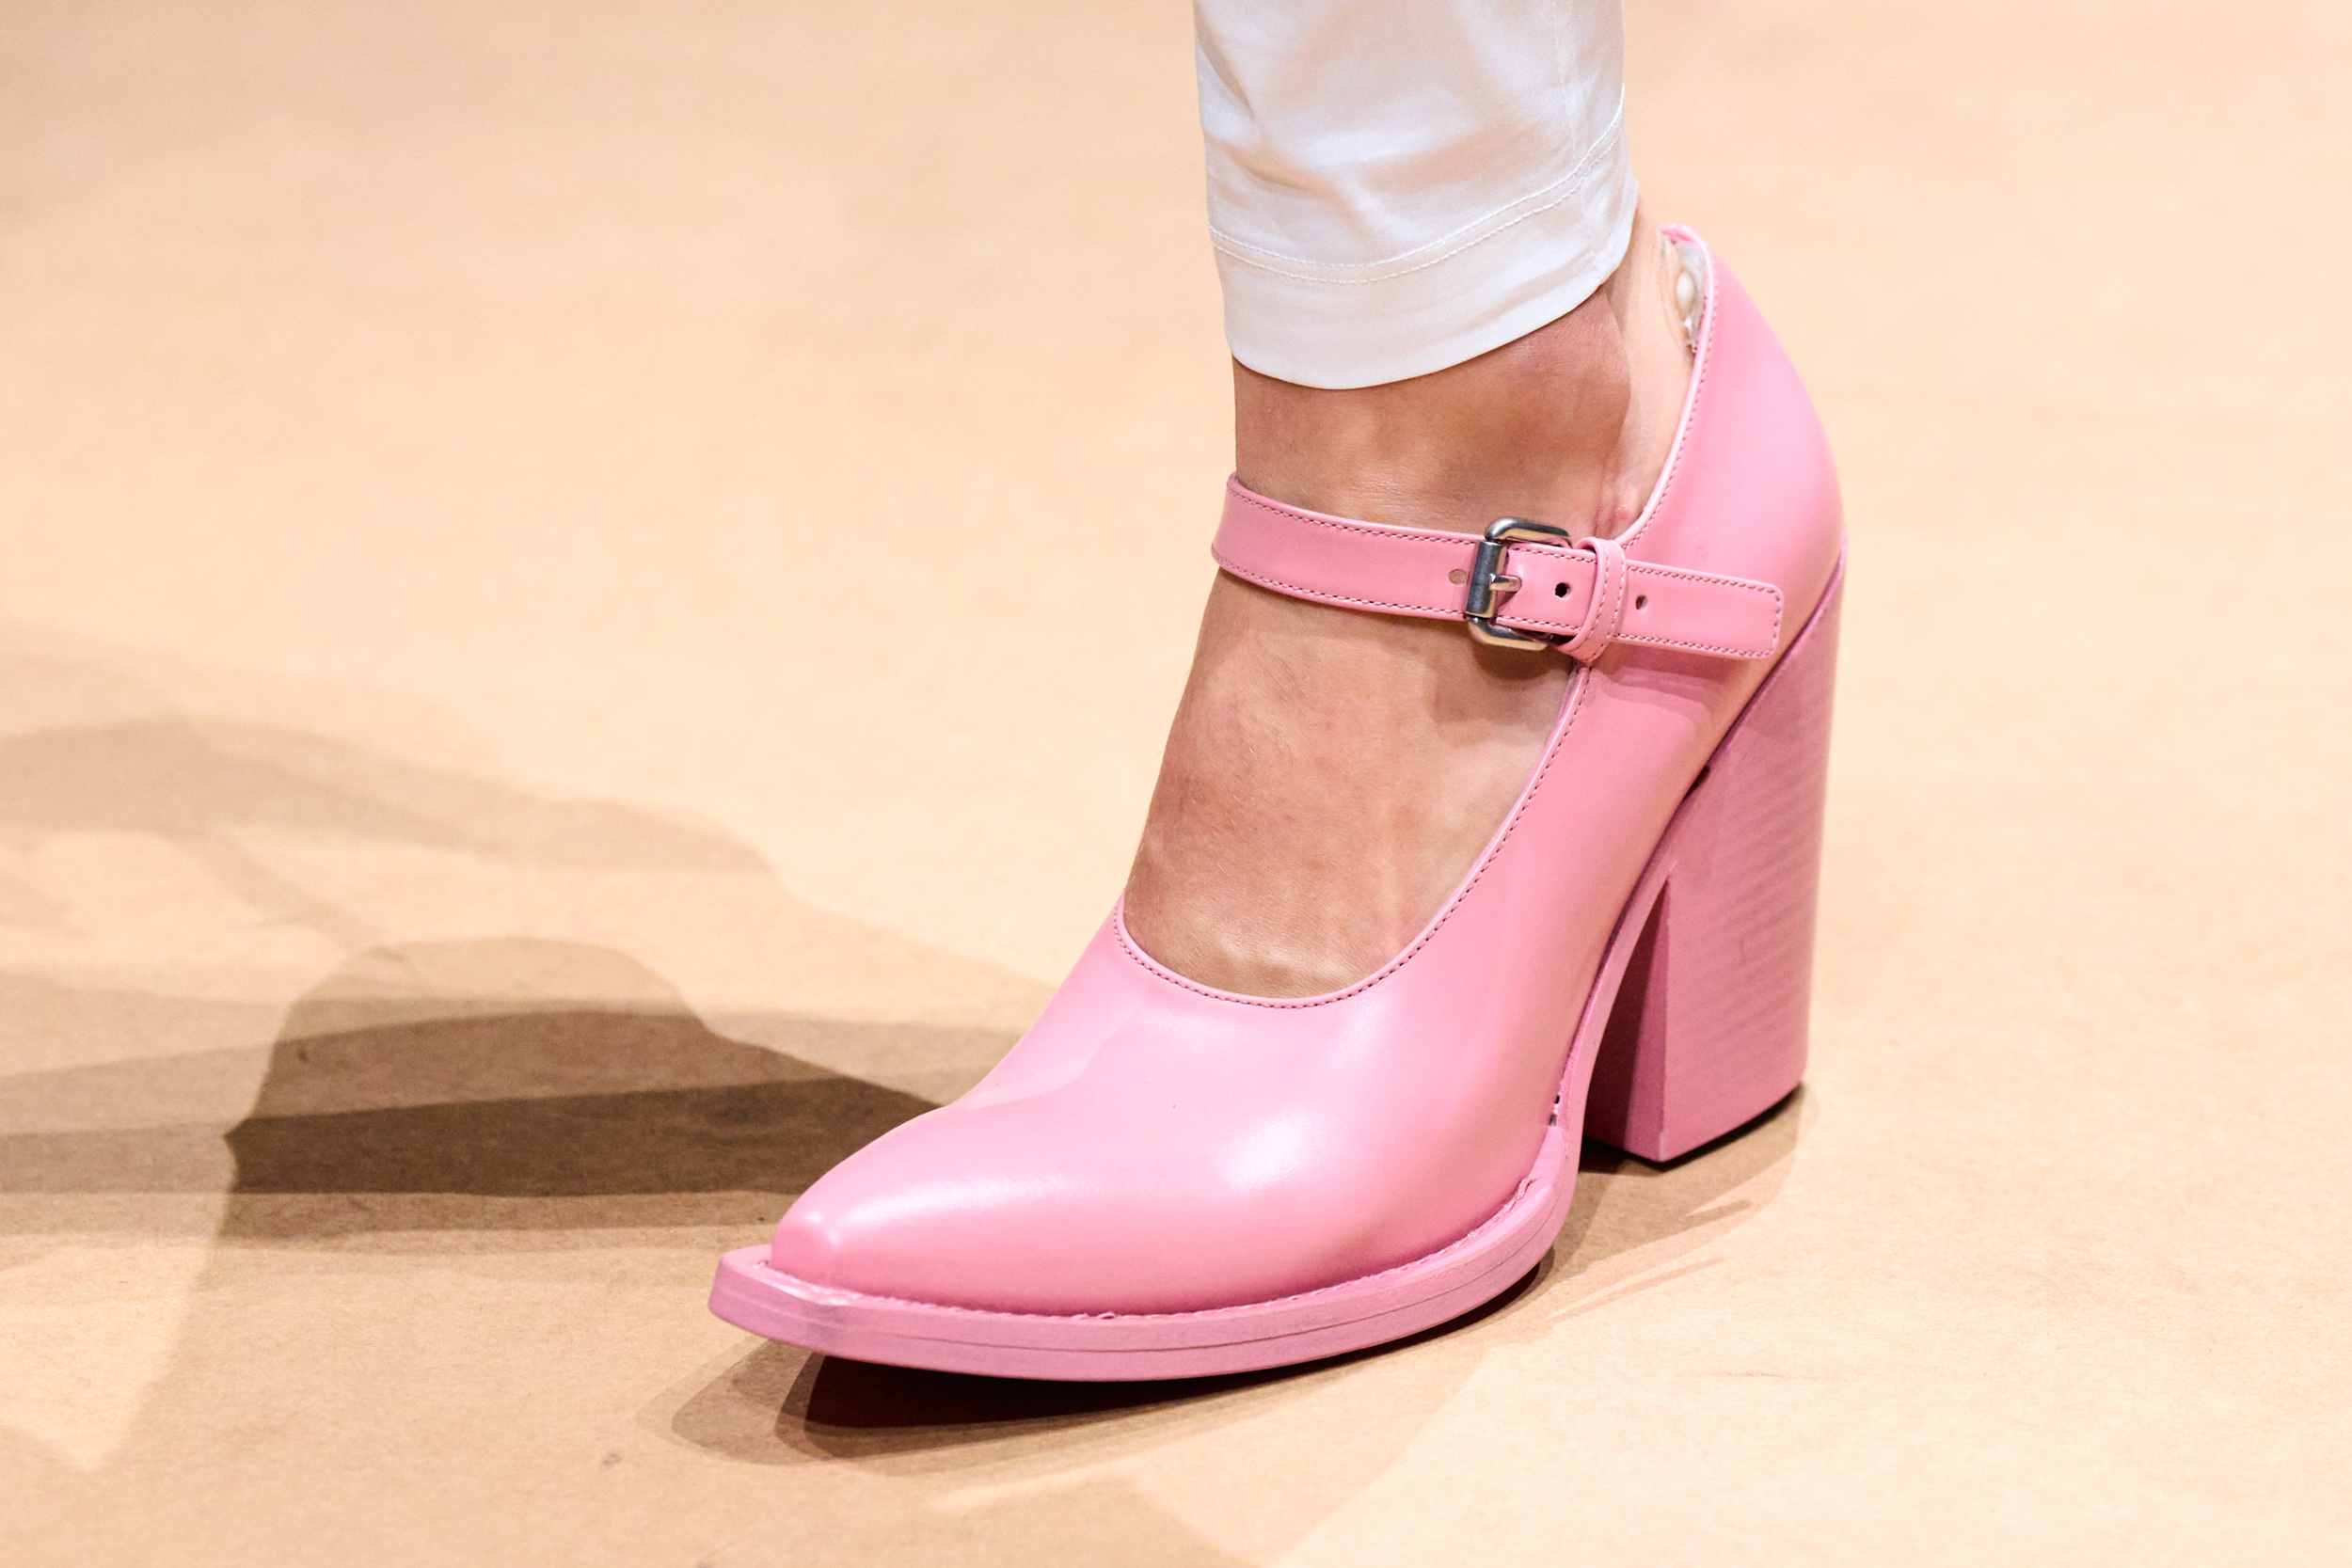 Pointed Toe Shoe Spring 2023 Fashion Trend The Impression